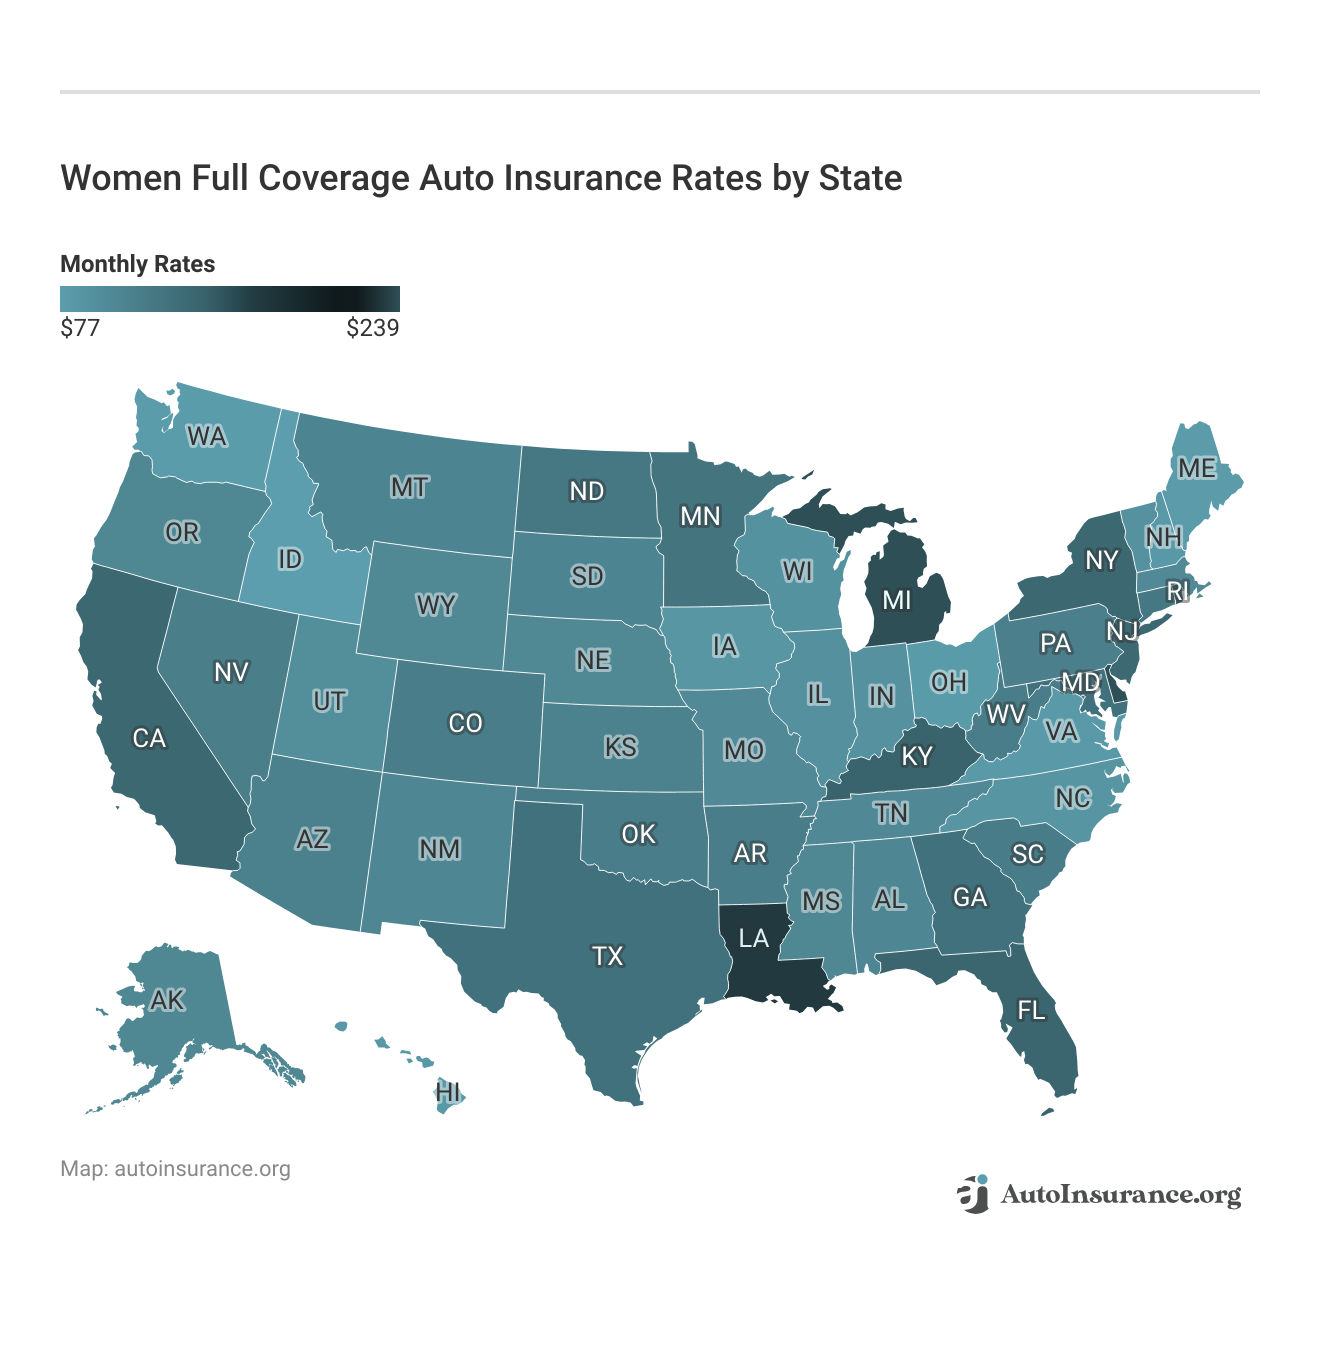 <h3>Women Full Coverage Auto Insurance Rates by State</h3>